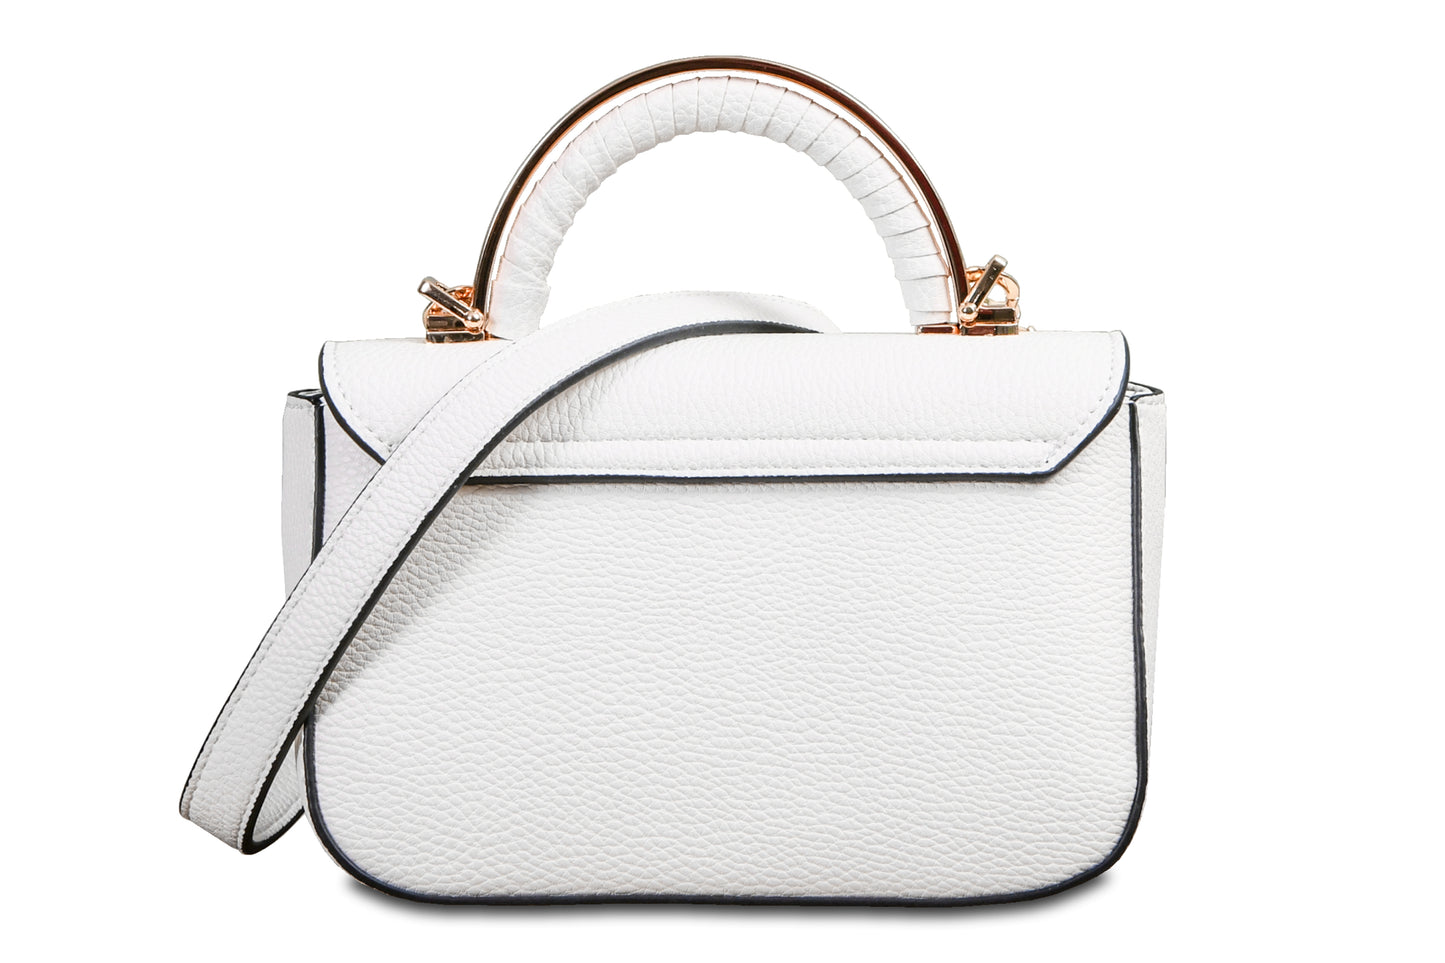 Mini Crossbody Pebble Grain Faux Leather Pearl White Handbag made by Dewi Maya back view available at the best boutique in Upstate South Carolina Spartanburg Greenville Dewi Maya Boutique